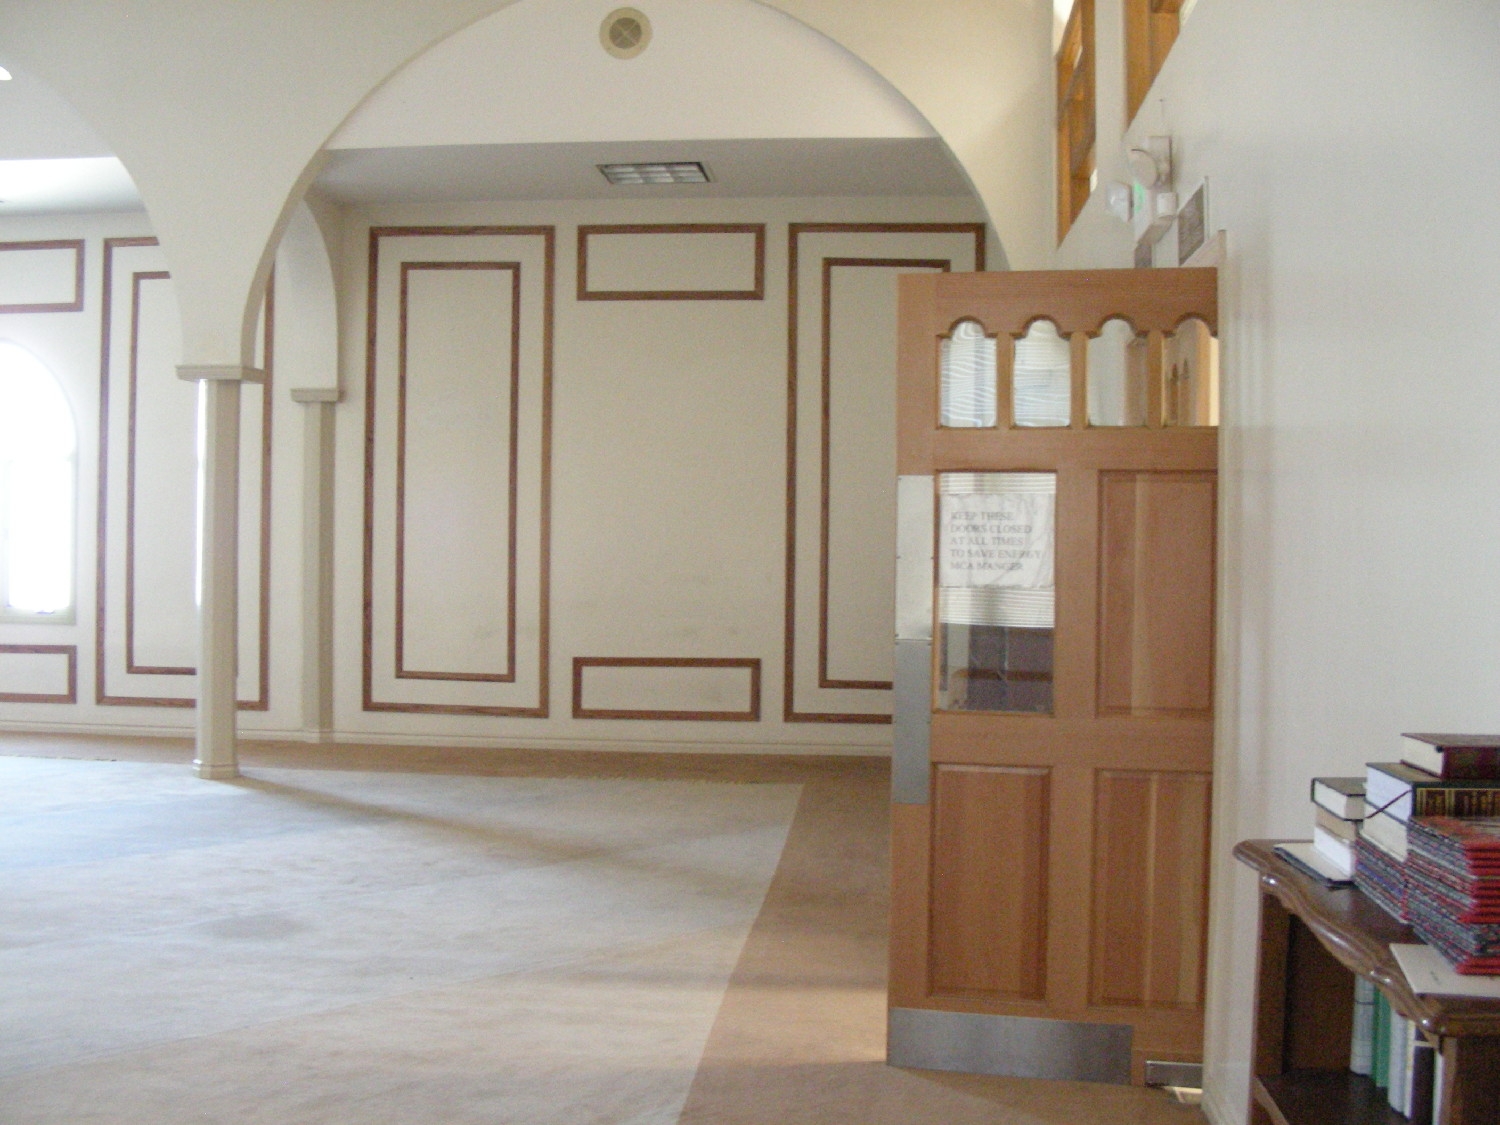 View within prayer hall, at entrance